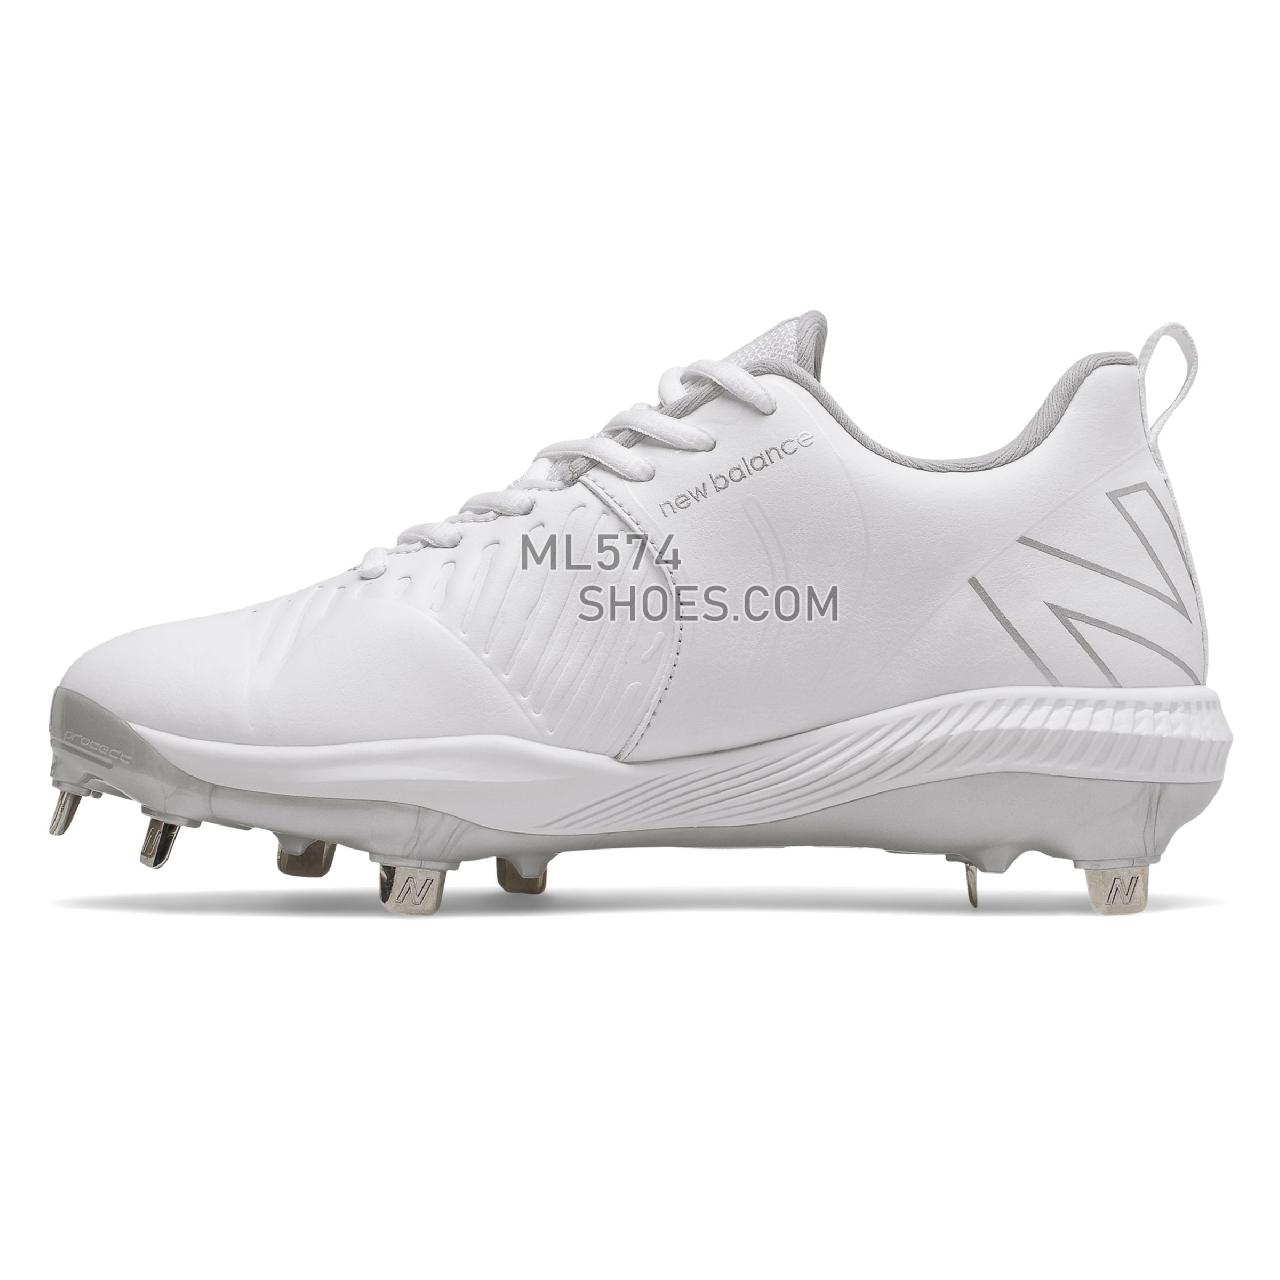 New Balance FuelCell SMFUSEv3 - Women's Softball - White - SMFUSEW3